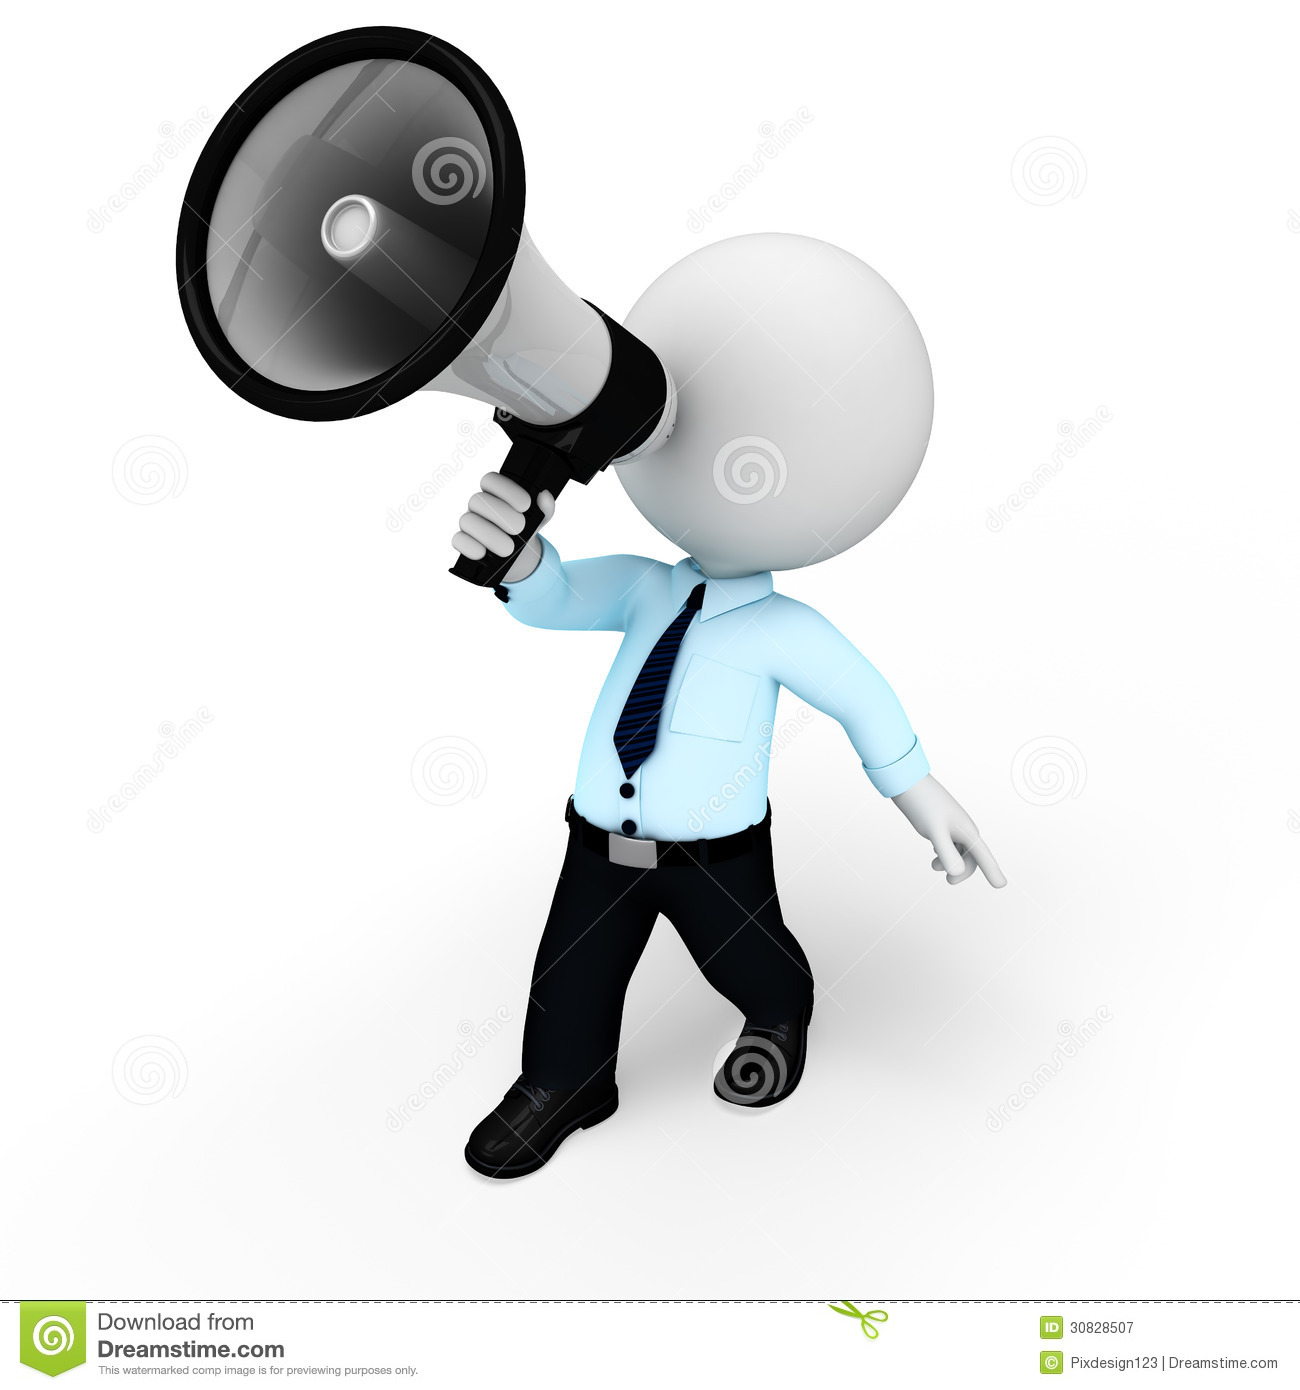       3d White People As Service Man With Loud Speaker  Image  30828507